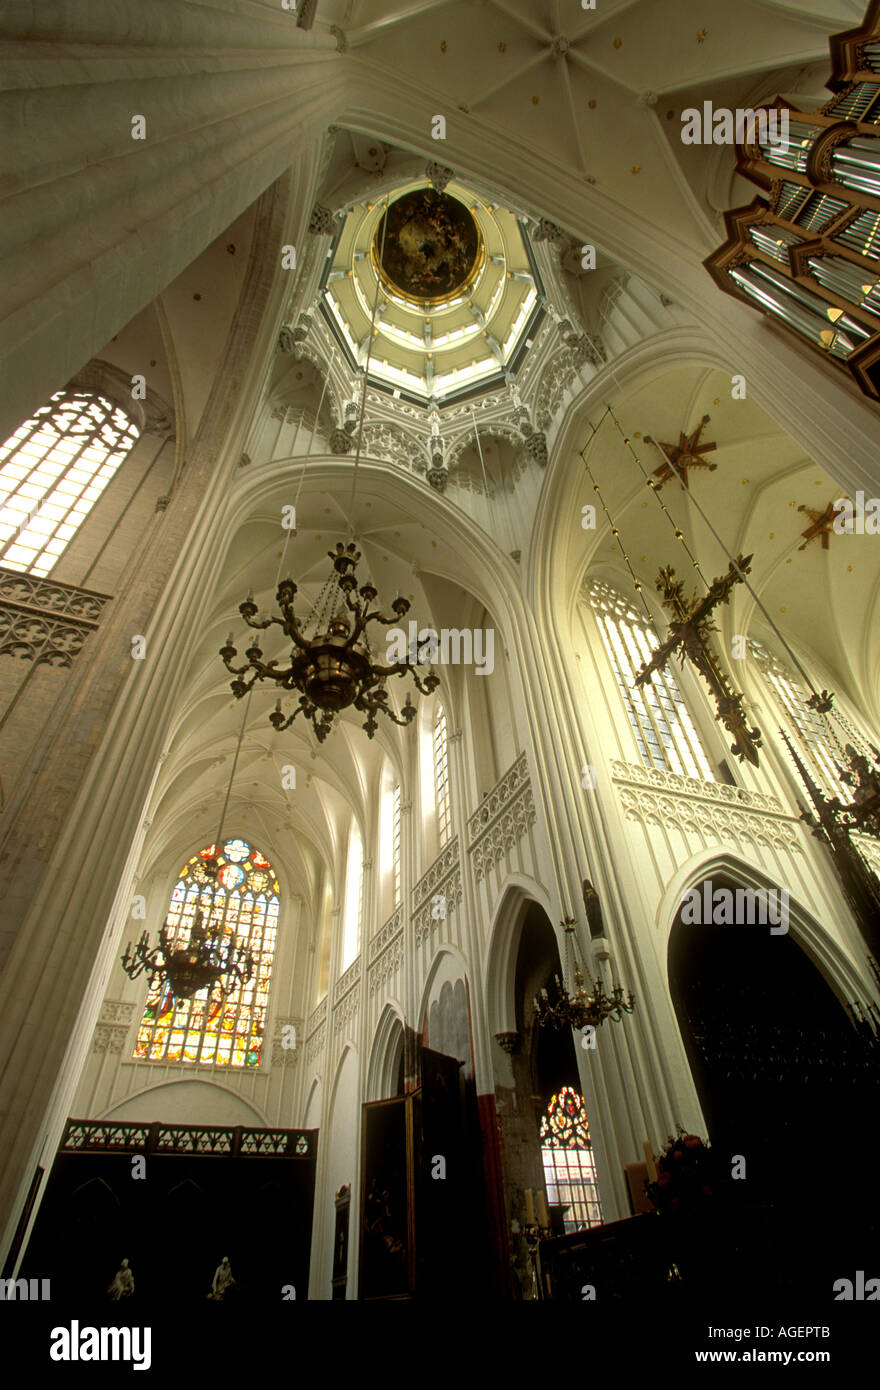 Cathedral of Our Lady, Roman Catholic cathedral, Roman Catholicism, city of Antwerp, Antwerp, Antwerp Province, Belgium, Europe Stock Photo